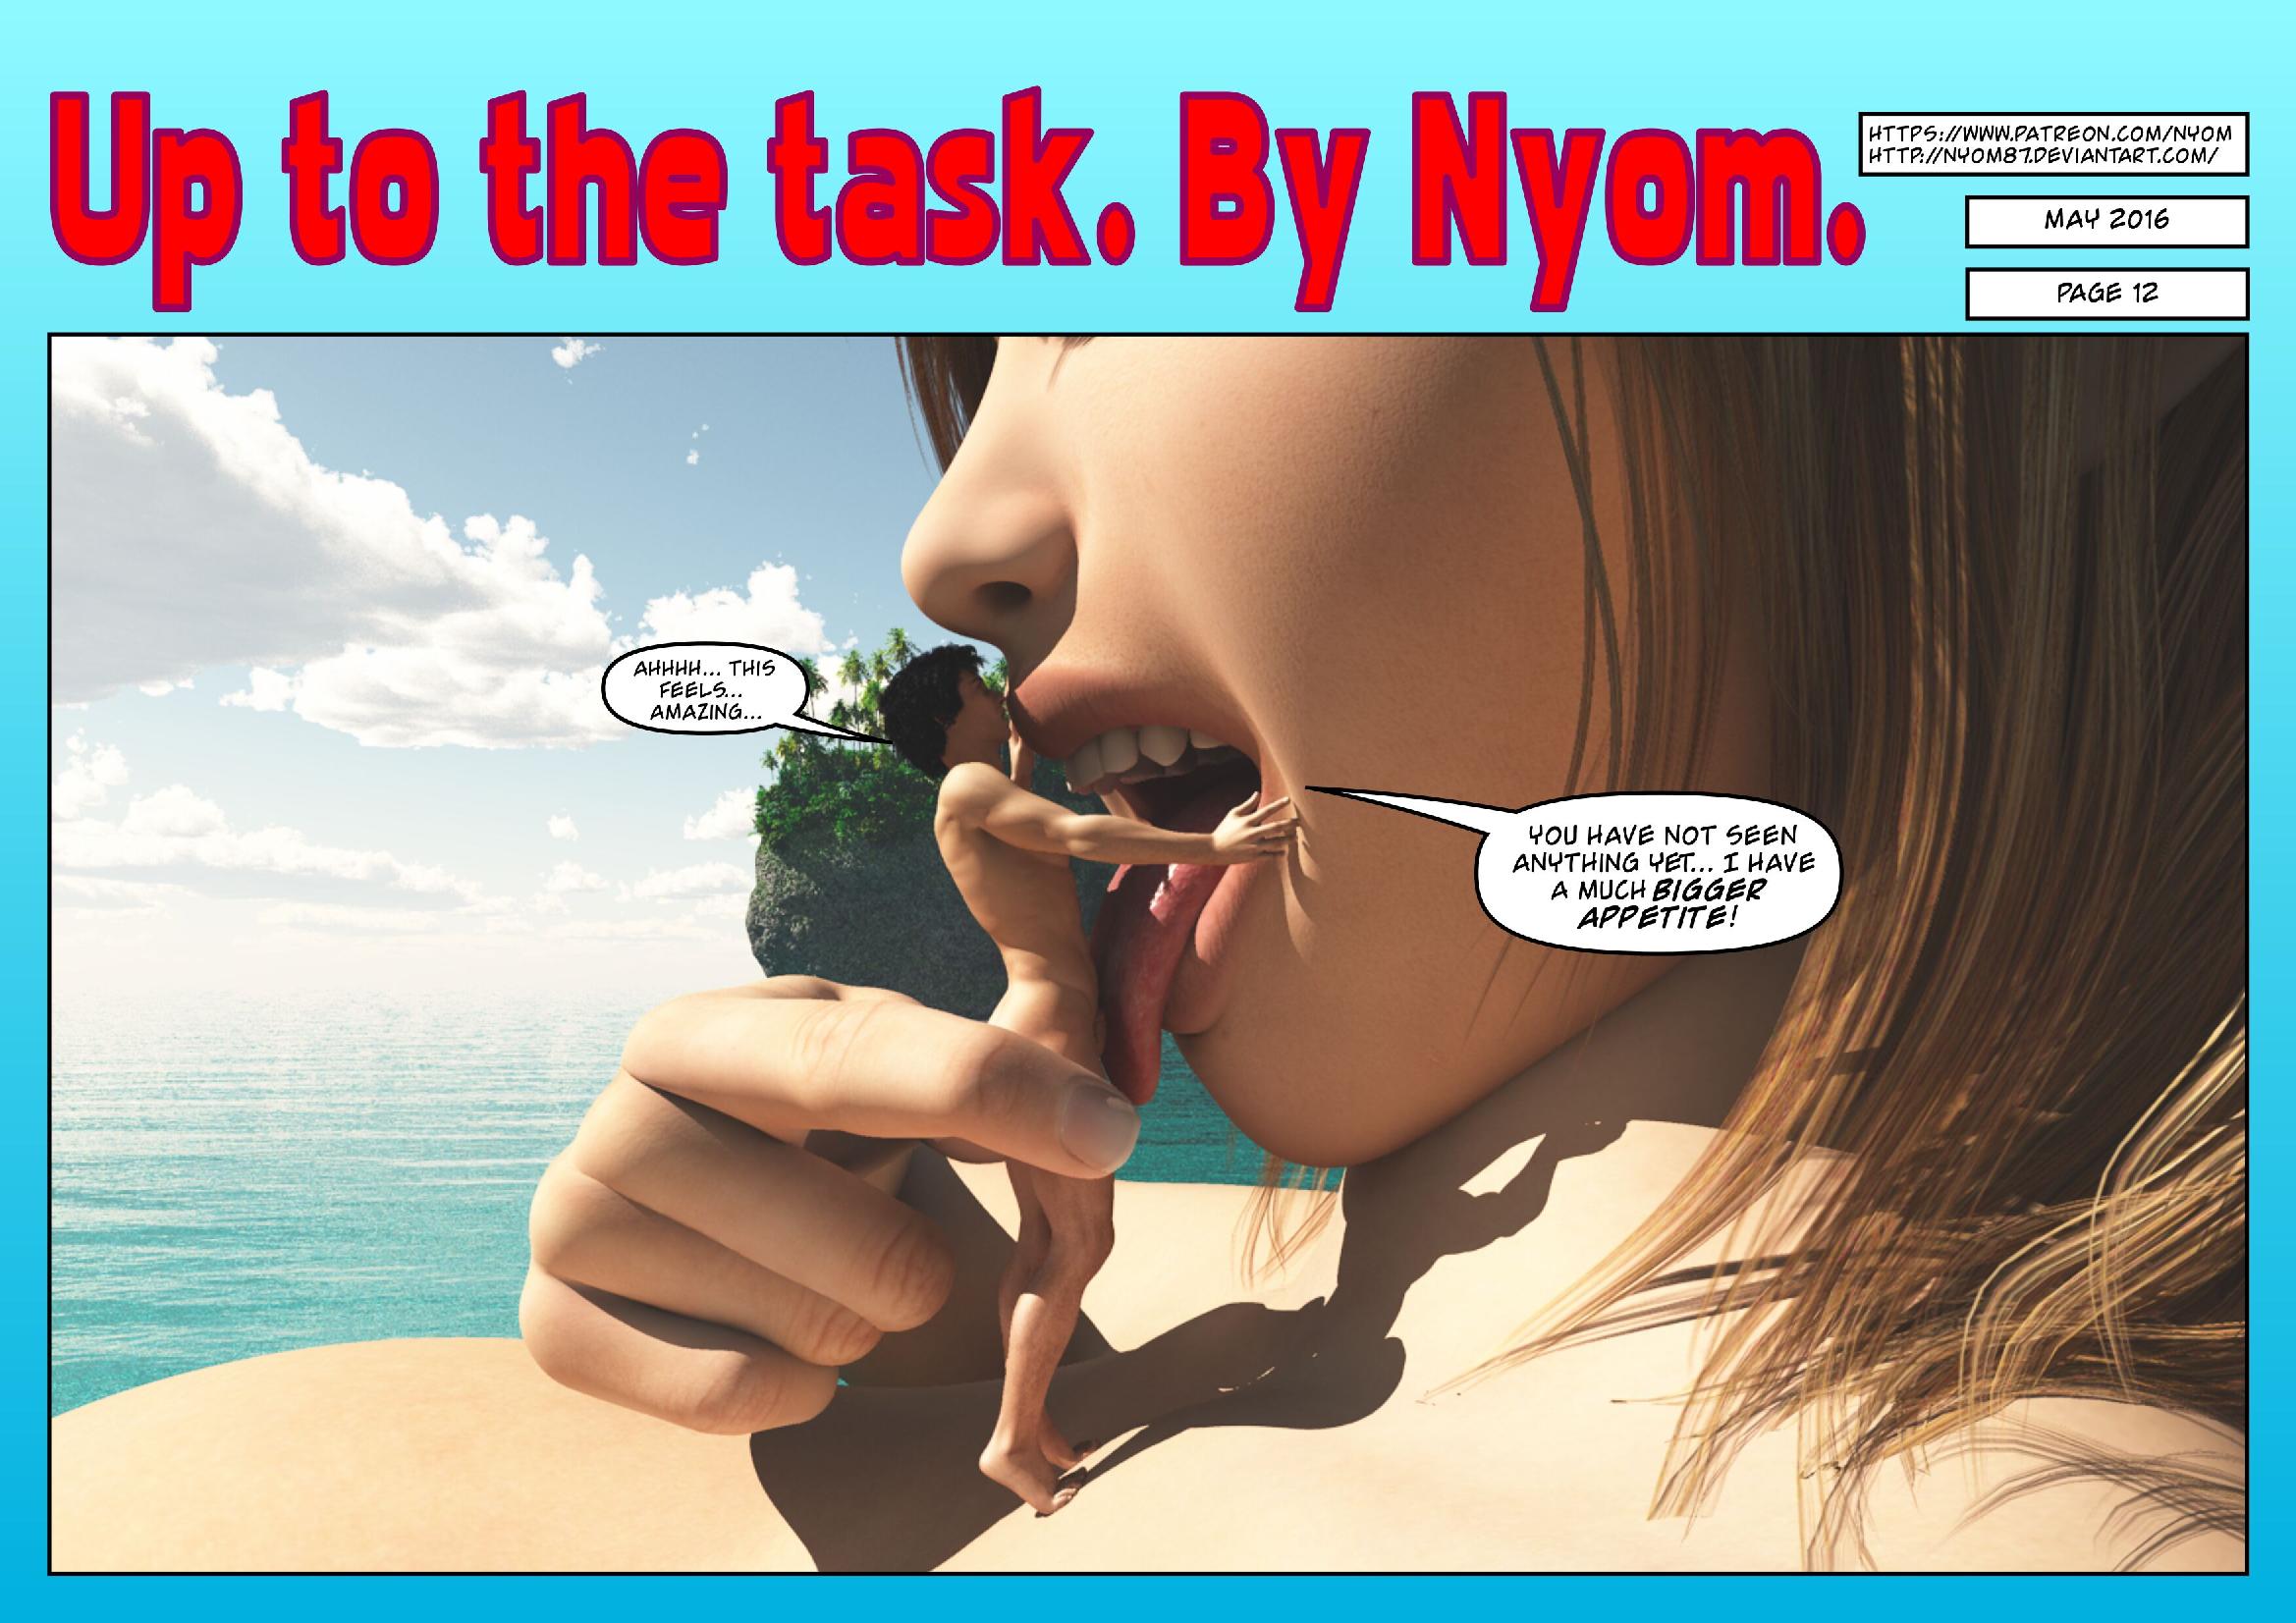 NYOM – UP TO THE TASK